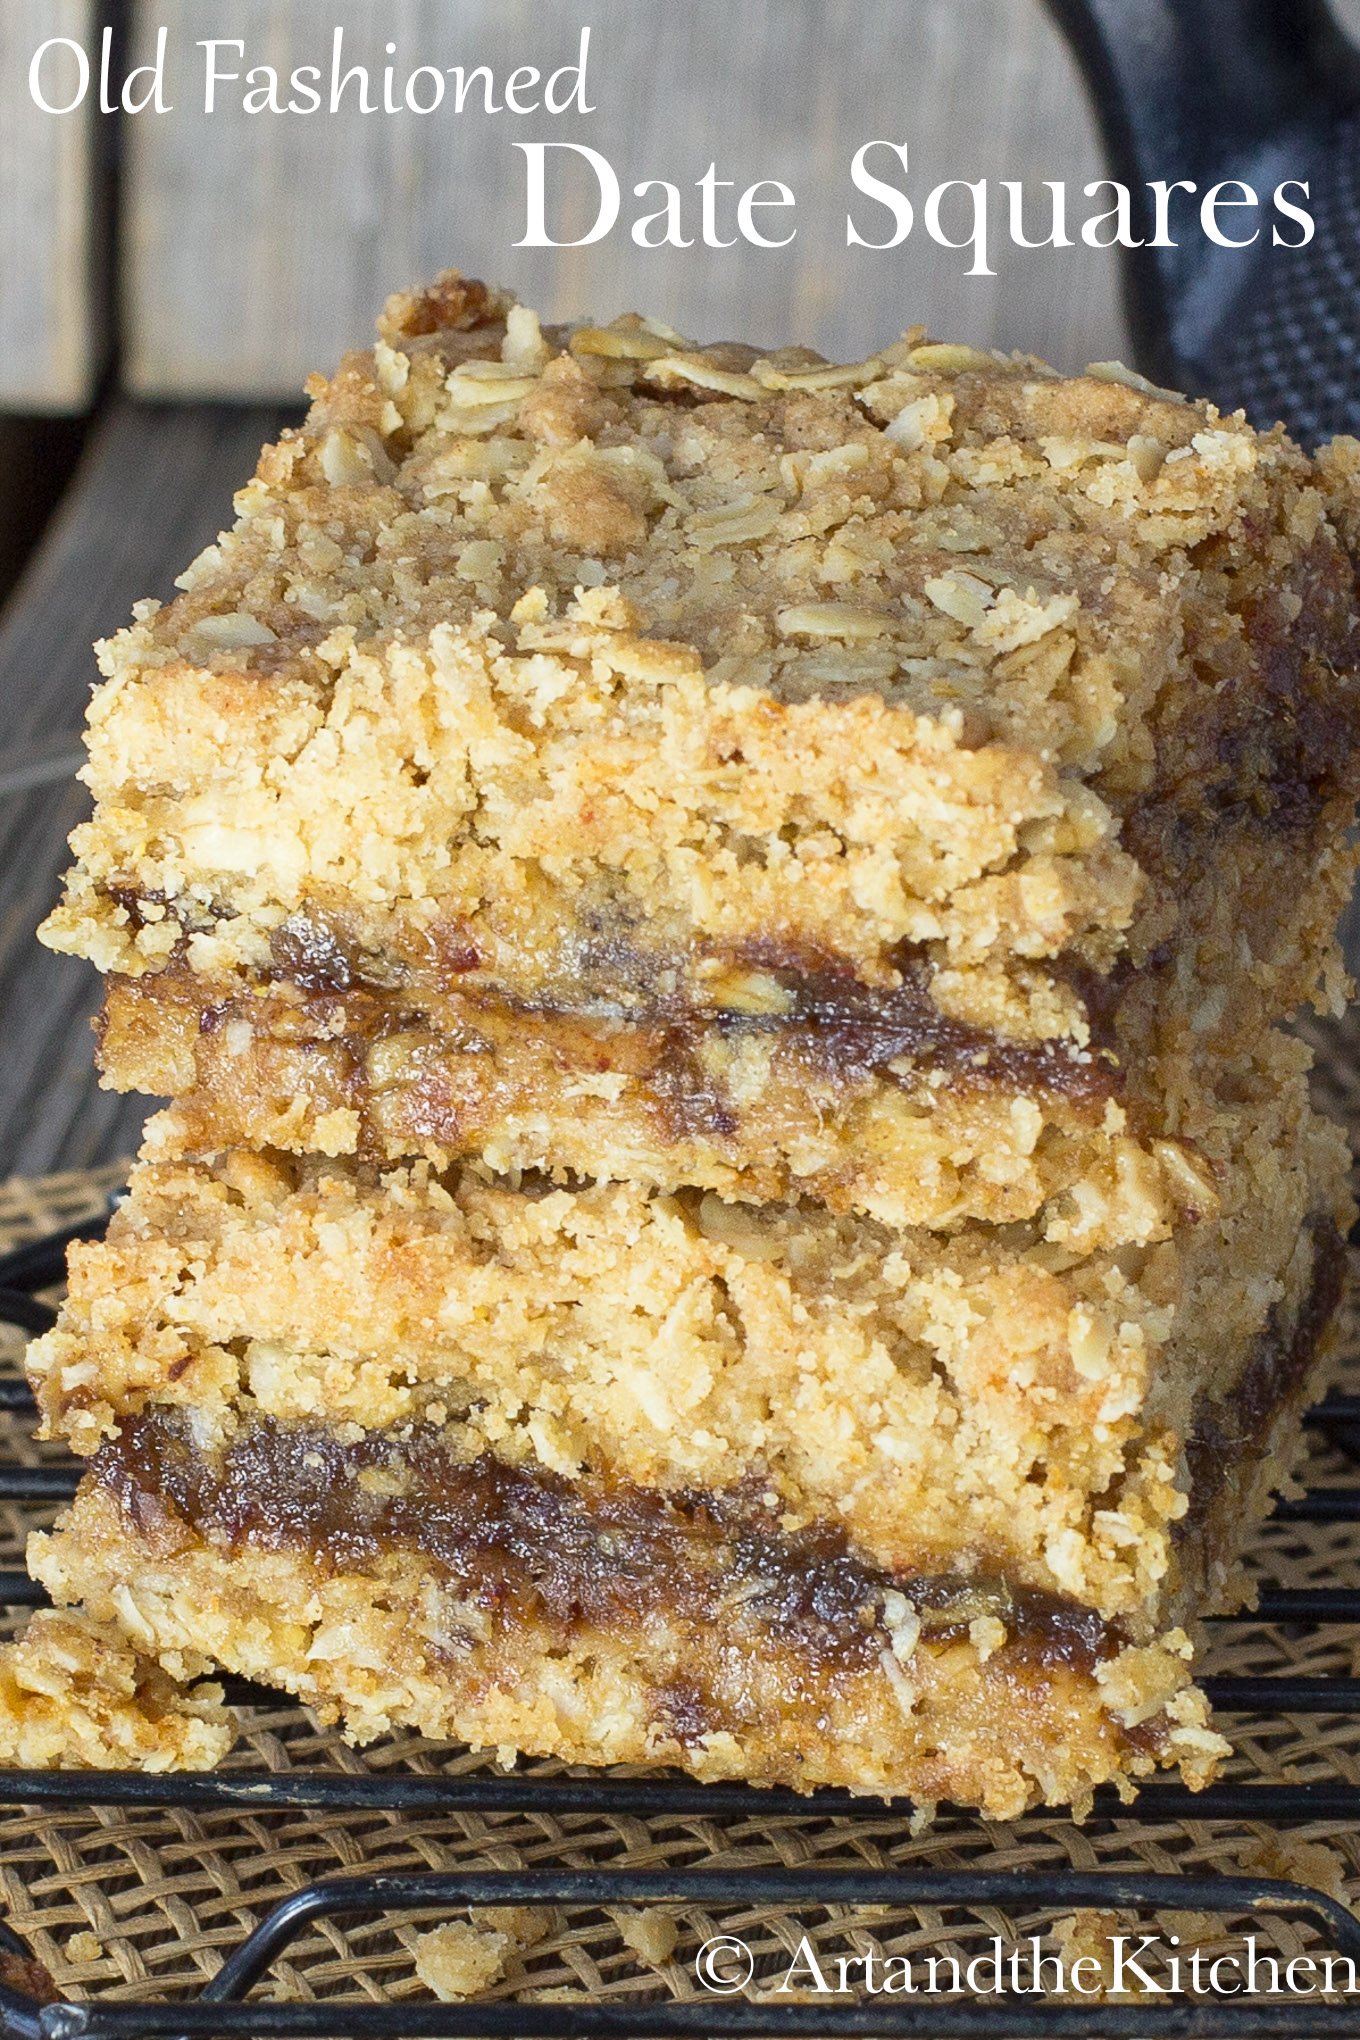 An old fashioned recipe for Date Squares or as we used to call them matrimonial squares. A delicious layer of sweet date filling sandwiched between a crumbly chewy oatmeal crust and topping. via @artandthekitch